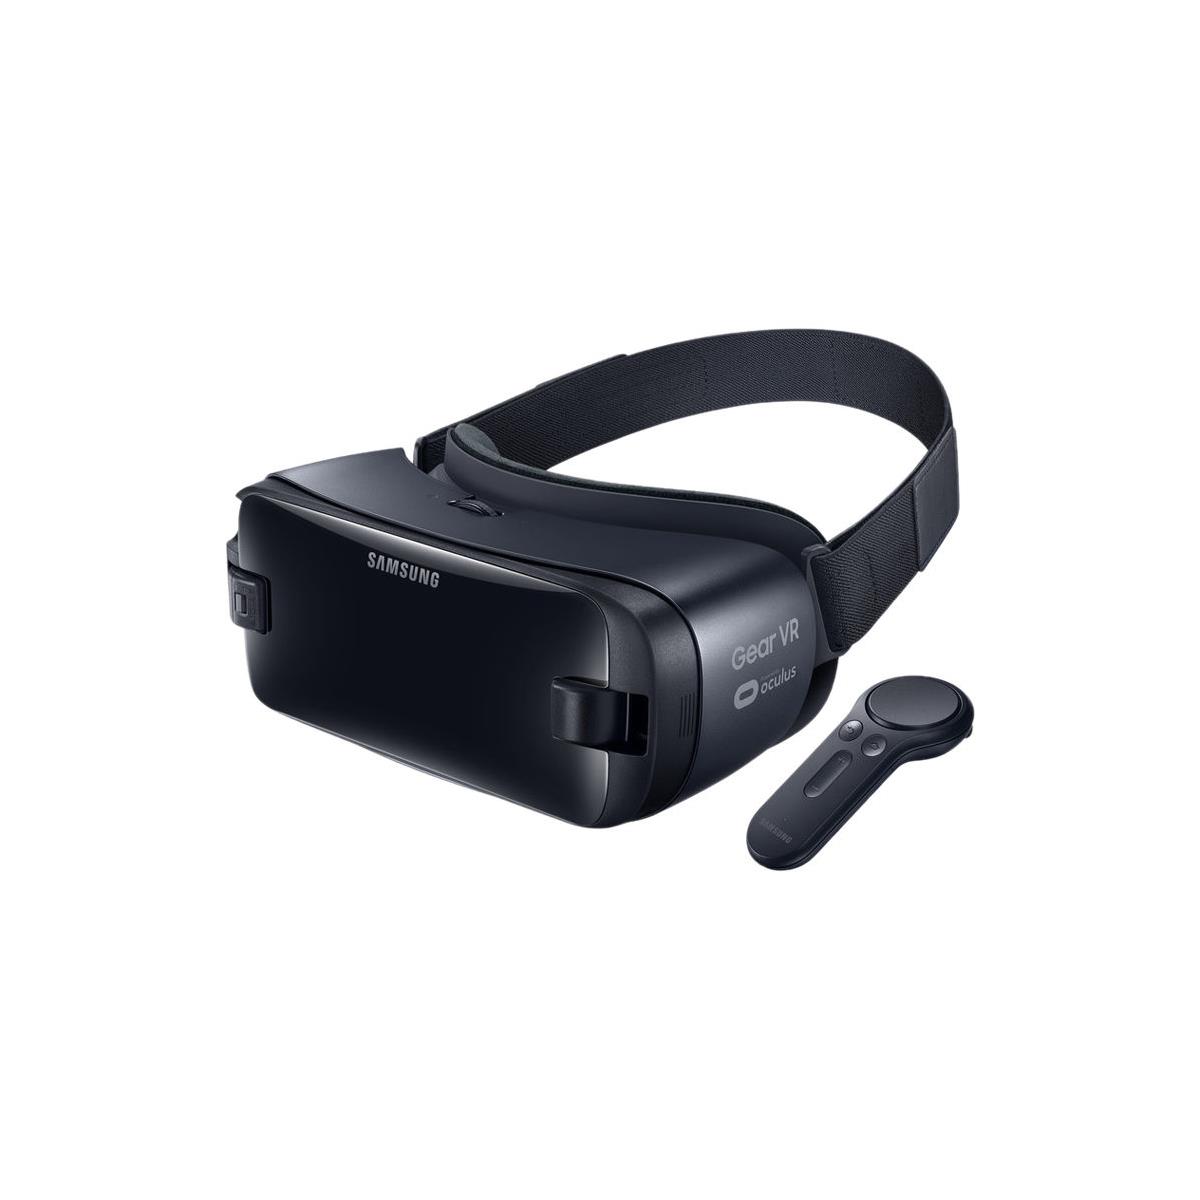 Image of Samsung Gear VR Smartphone Headset with Controller (2017 Edition)